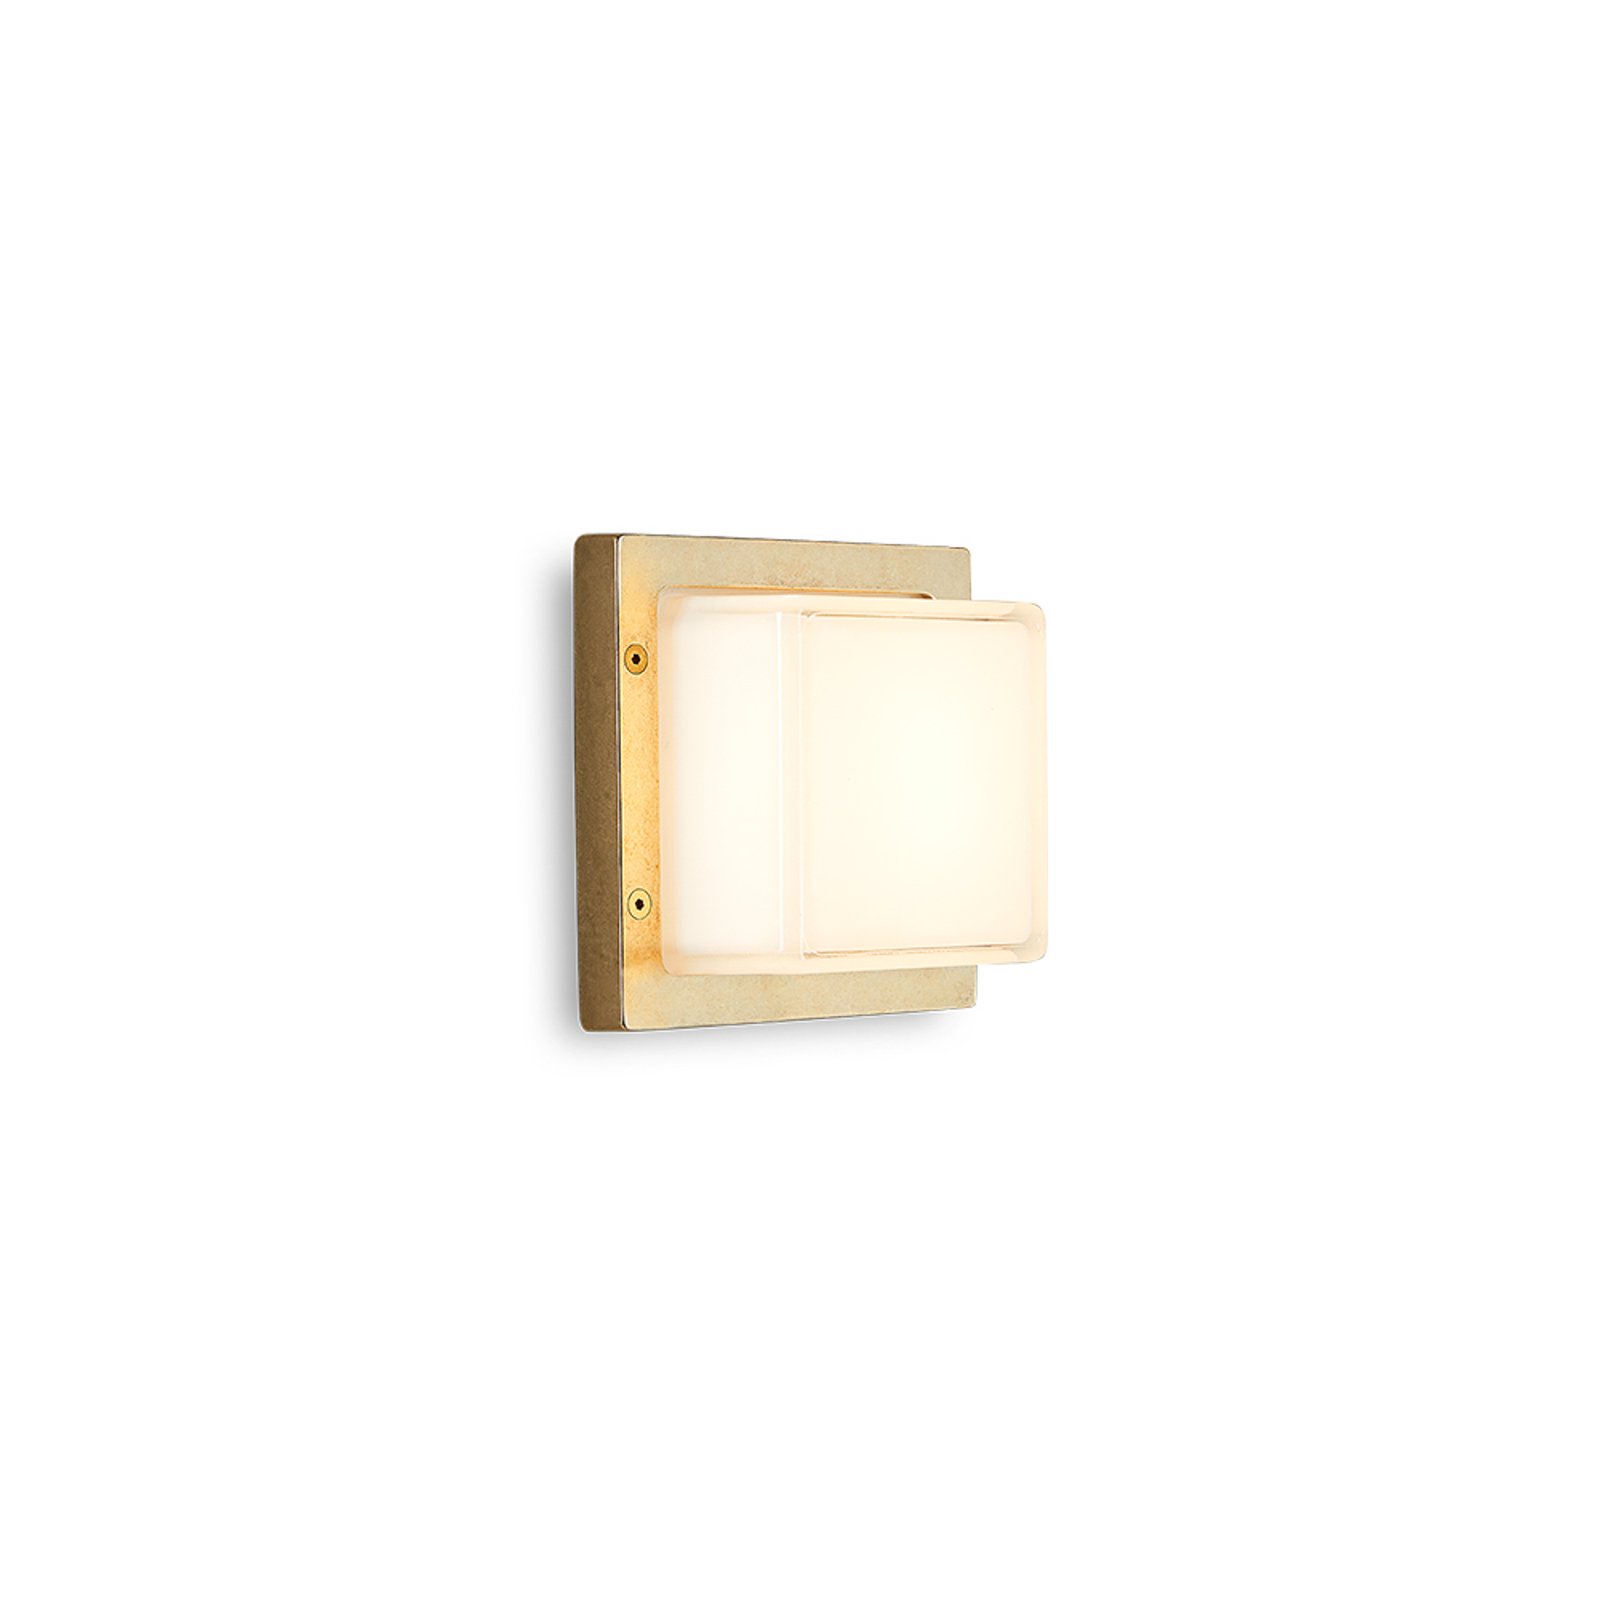 Ice Cubic 3403 LED wall light, natural brass